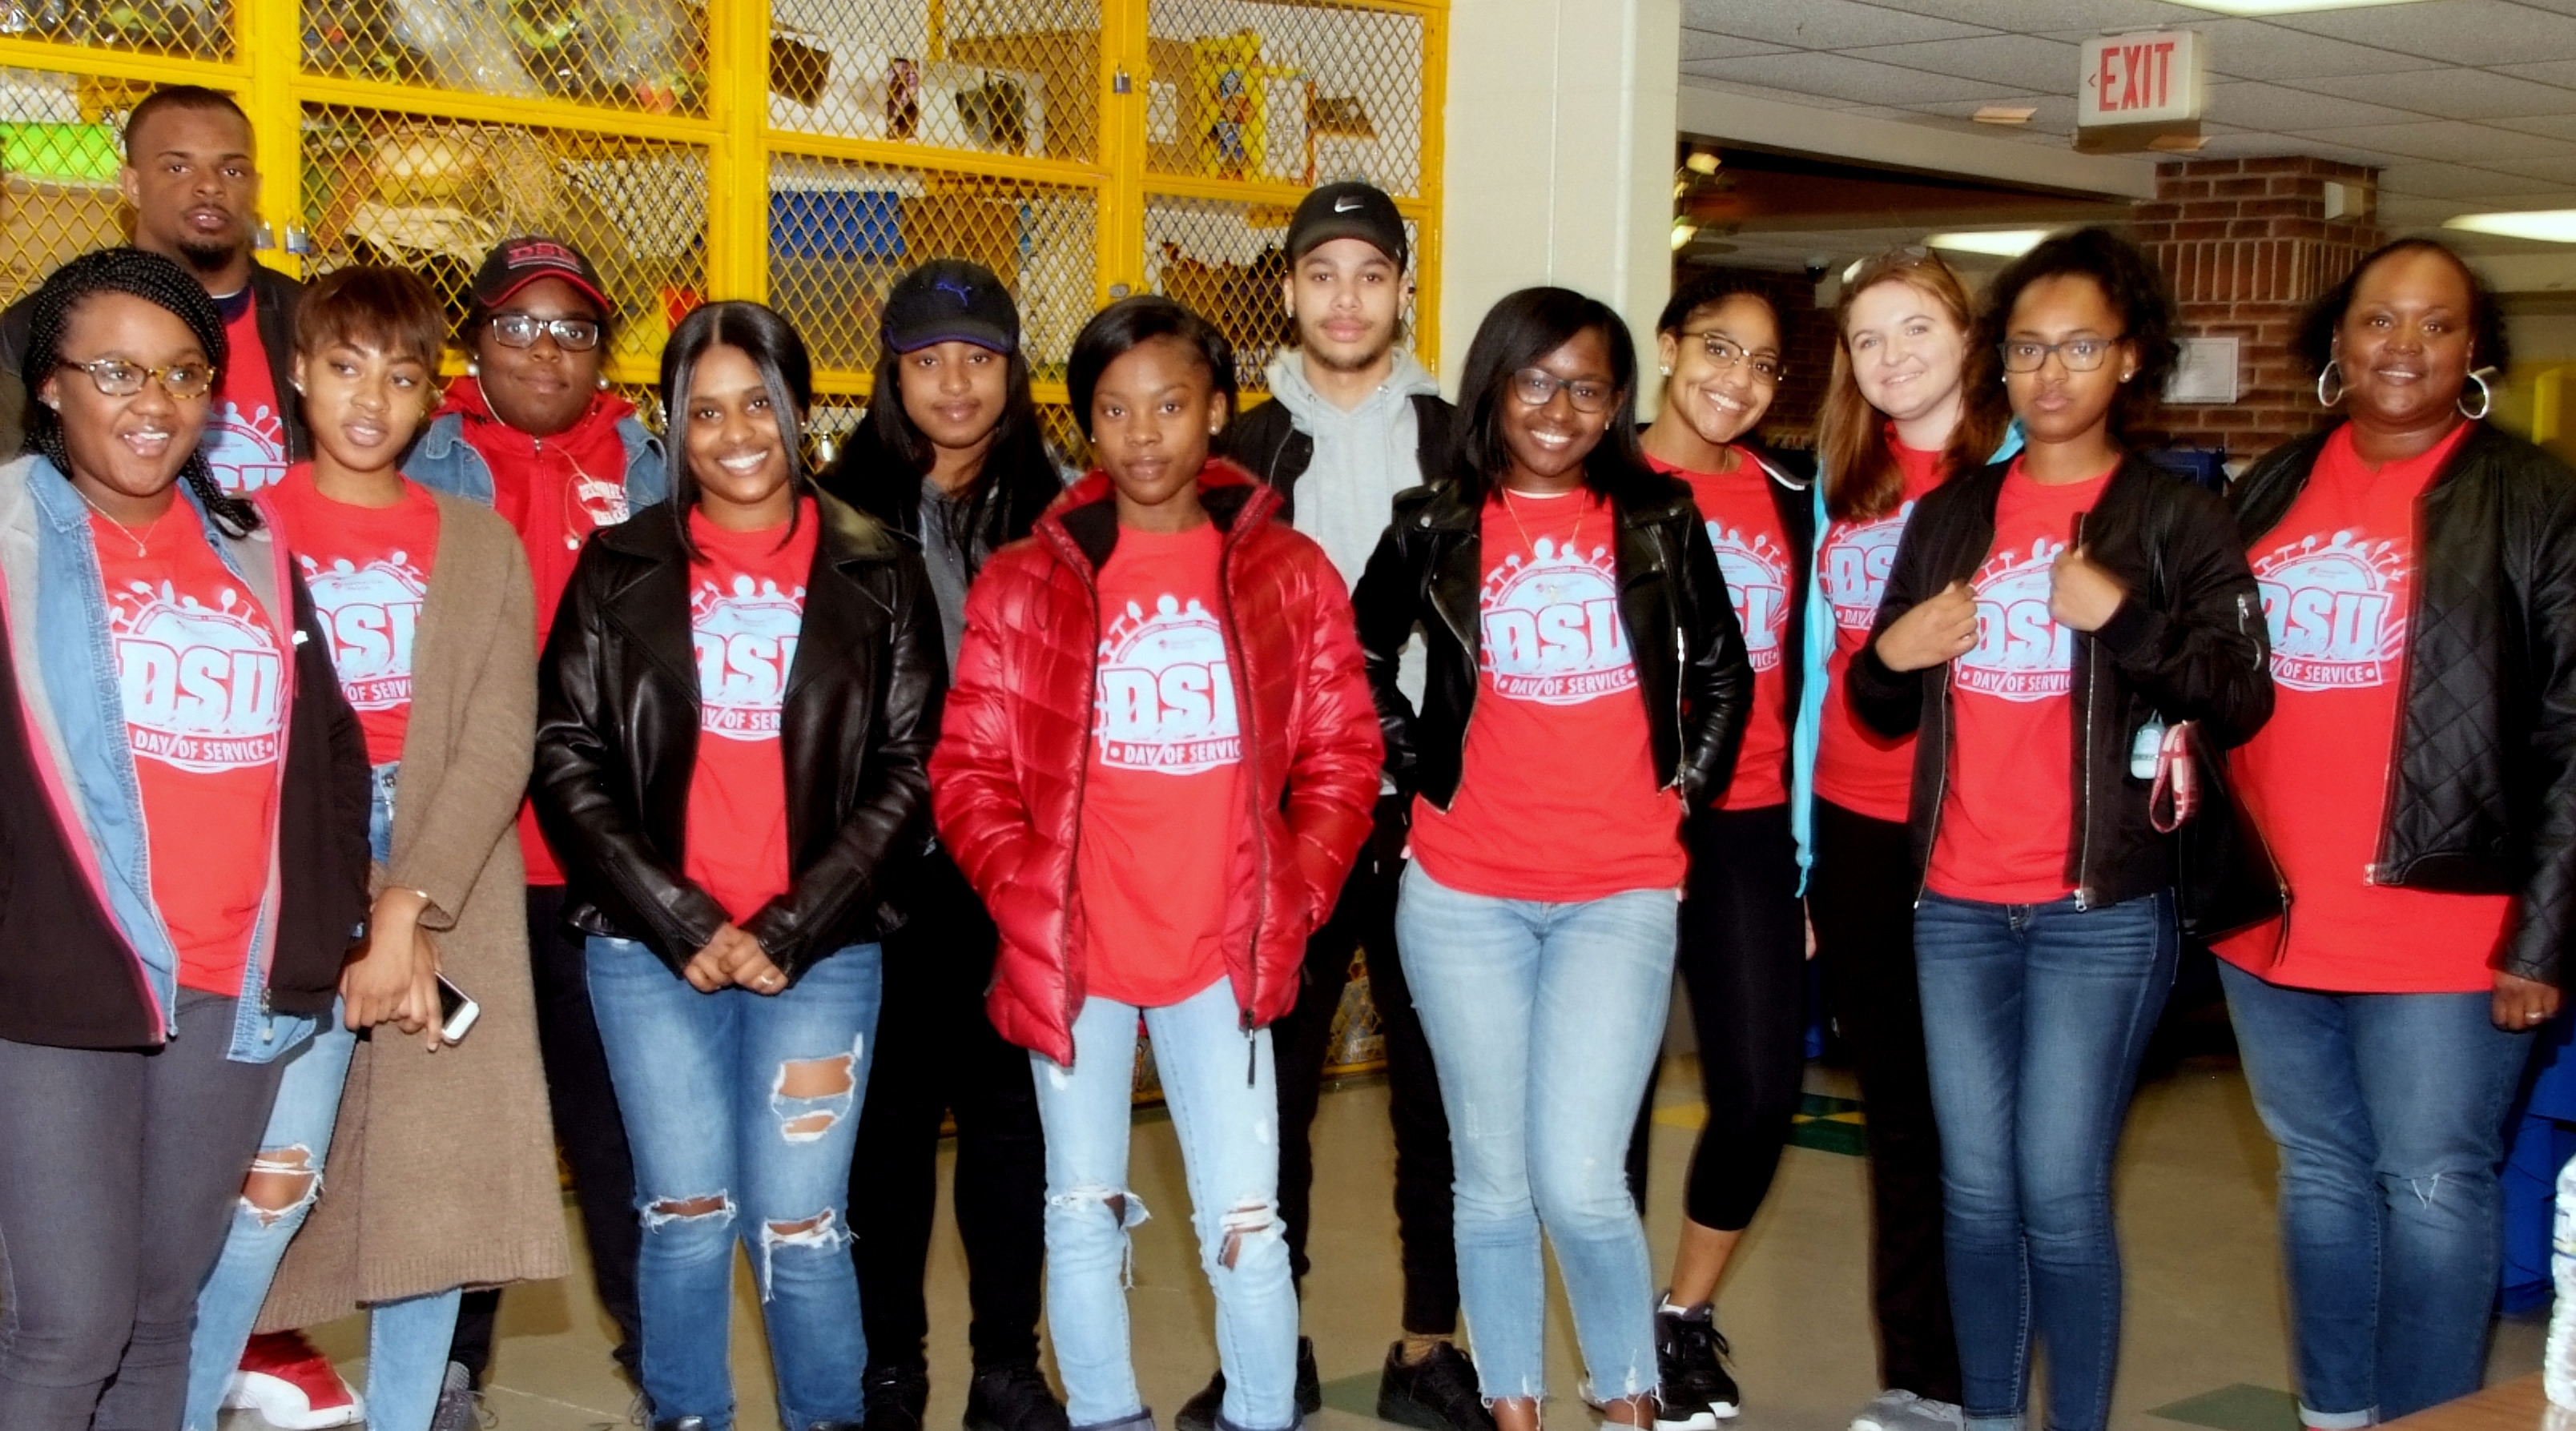 DSU students participating in the Inspired Day of Service event